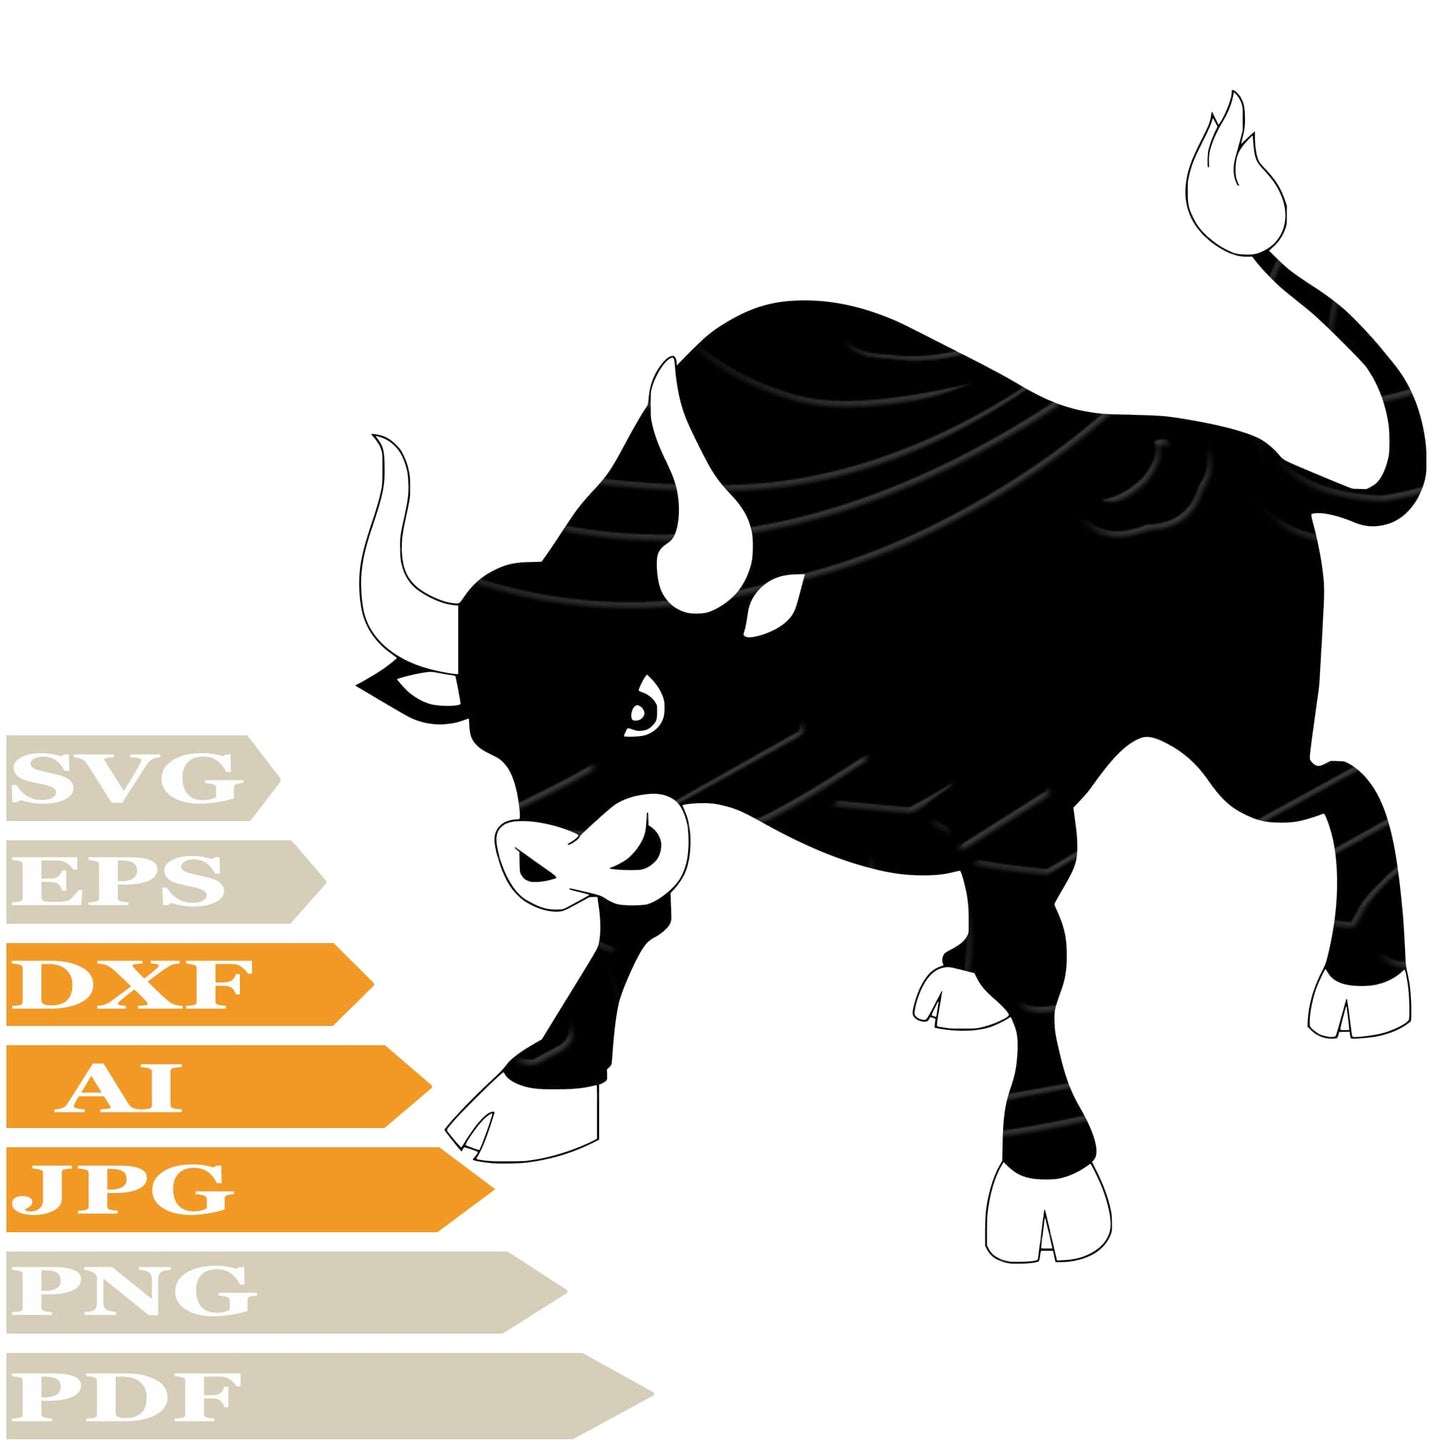 Bull SVG, Angry Bull SVG Design, Bull PNG, Wild Bull Vector Graphics, Wild Bull Digital Instant Download, Angry Bull For Cricut, Clip Art, Cut File, T-Shirts, Silhouette